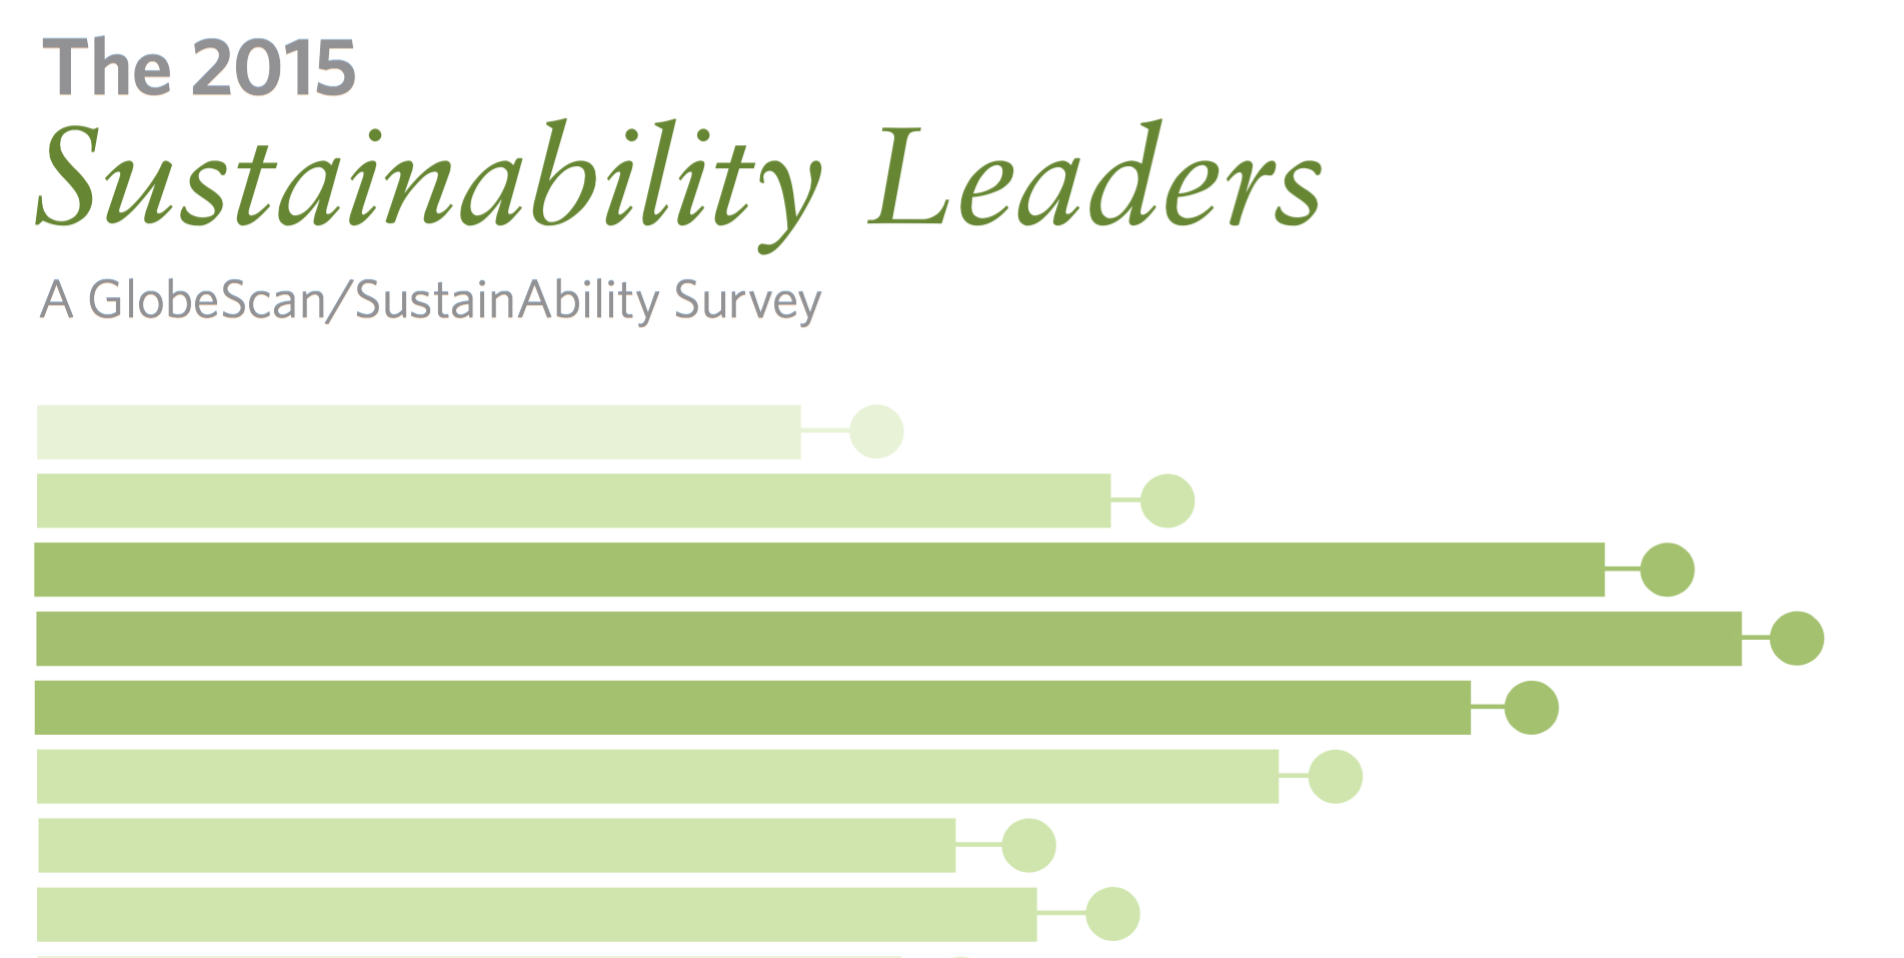 The 2015 Sustainability Leaders: A GlobeScan/SustainAbility Survey